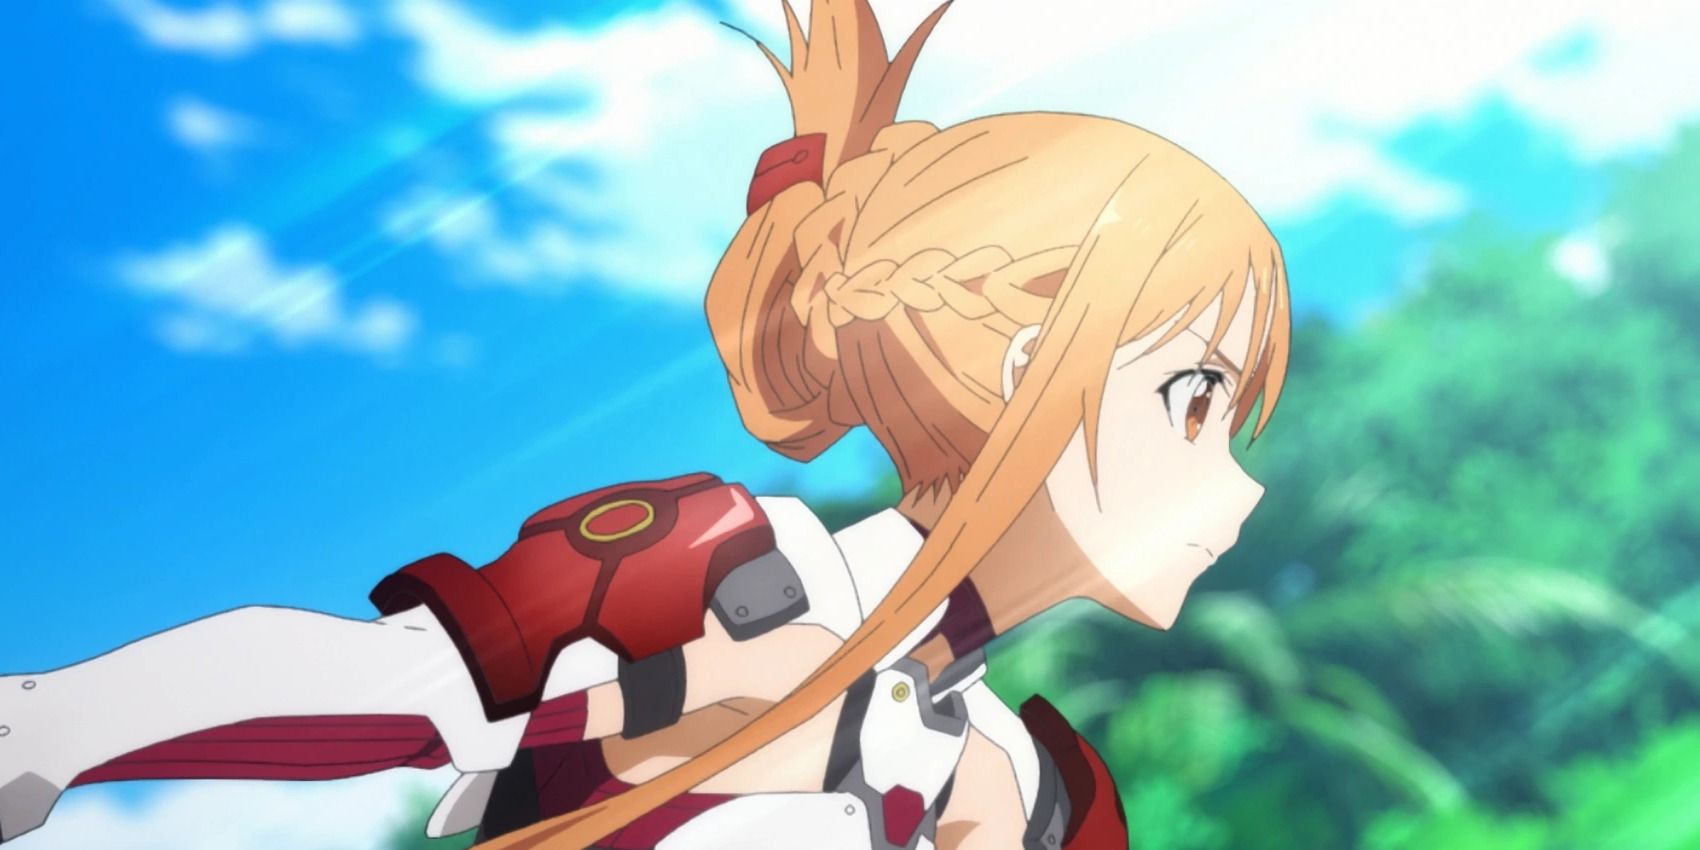 the character yuuki asuna from the anime sword art online